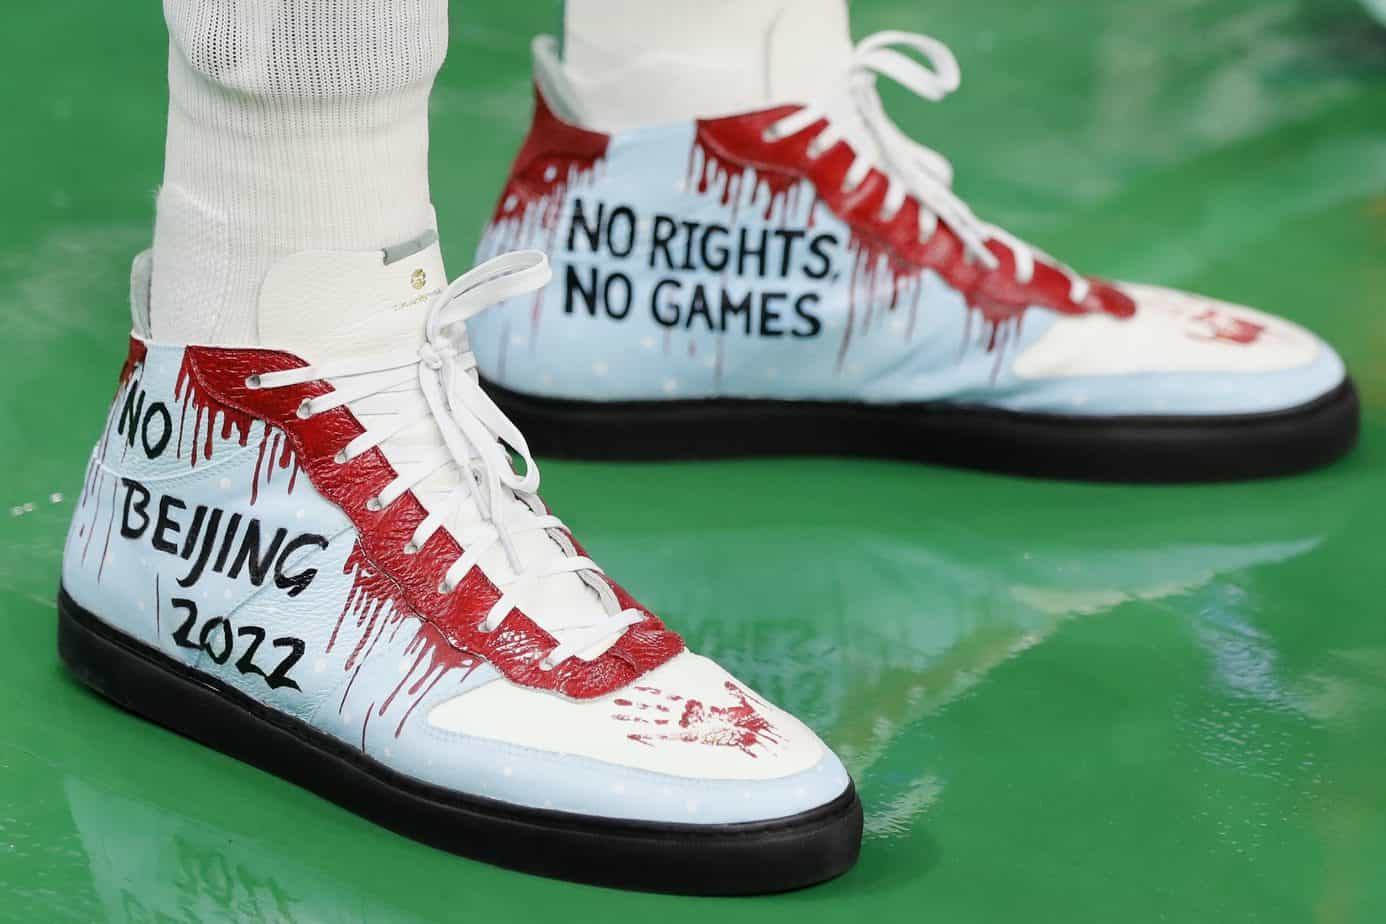 Boston Celtics center Enes Kanter said NBA employees got involved when he was wearing "Free Tibet" shoes prior to the game against the Knicks